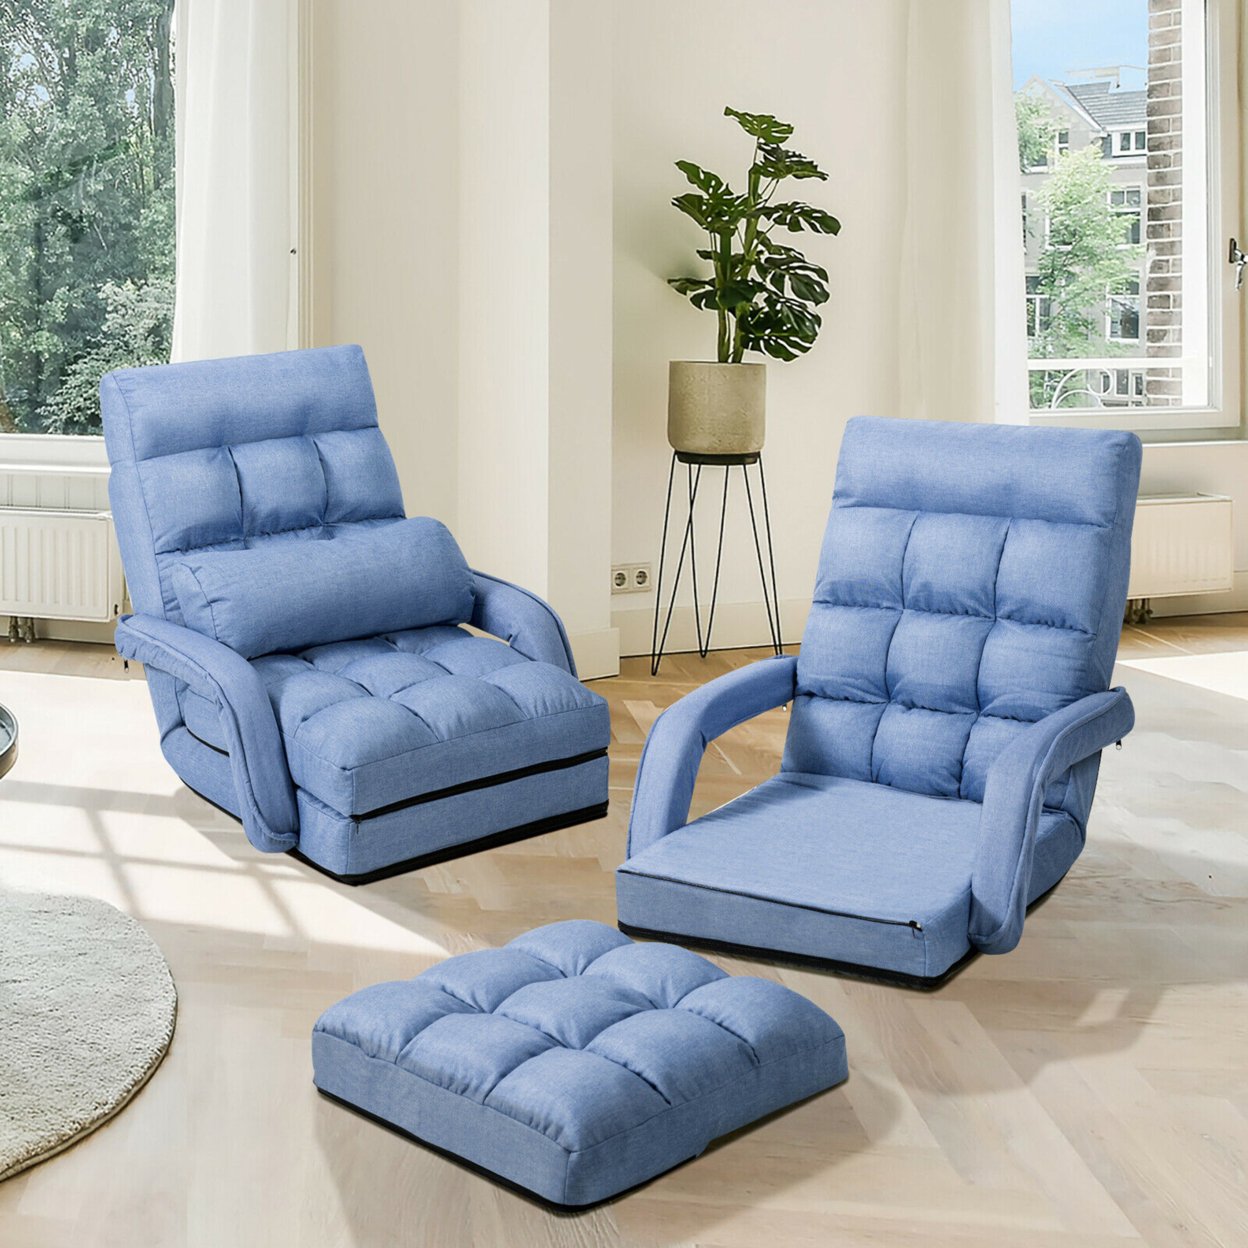 Blue Folding Lazy Sofa Floor Chair Sofa Lounger Bed With Armrests And Pillow